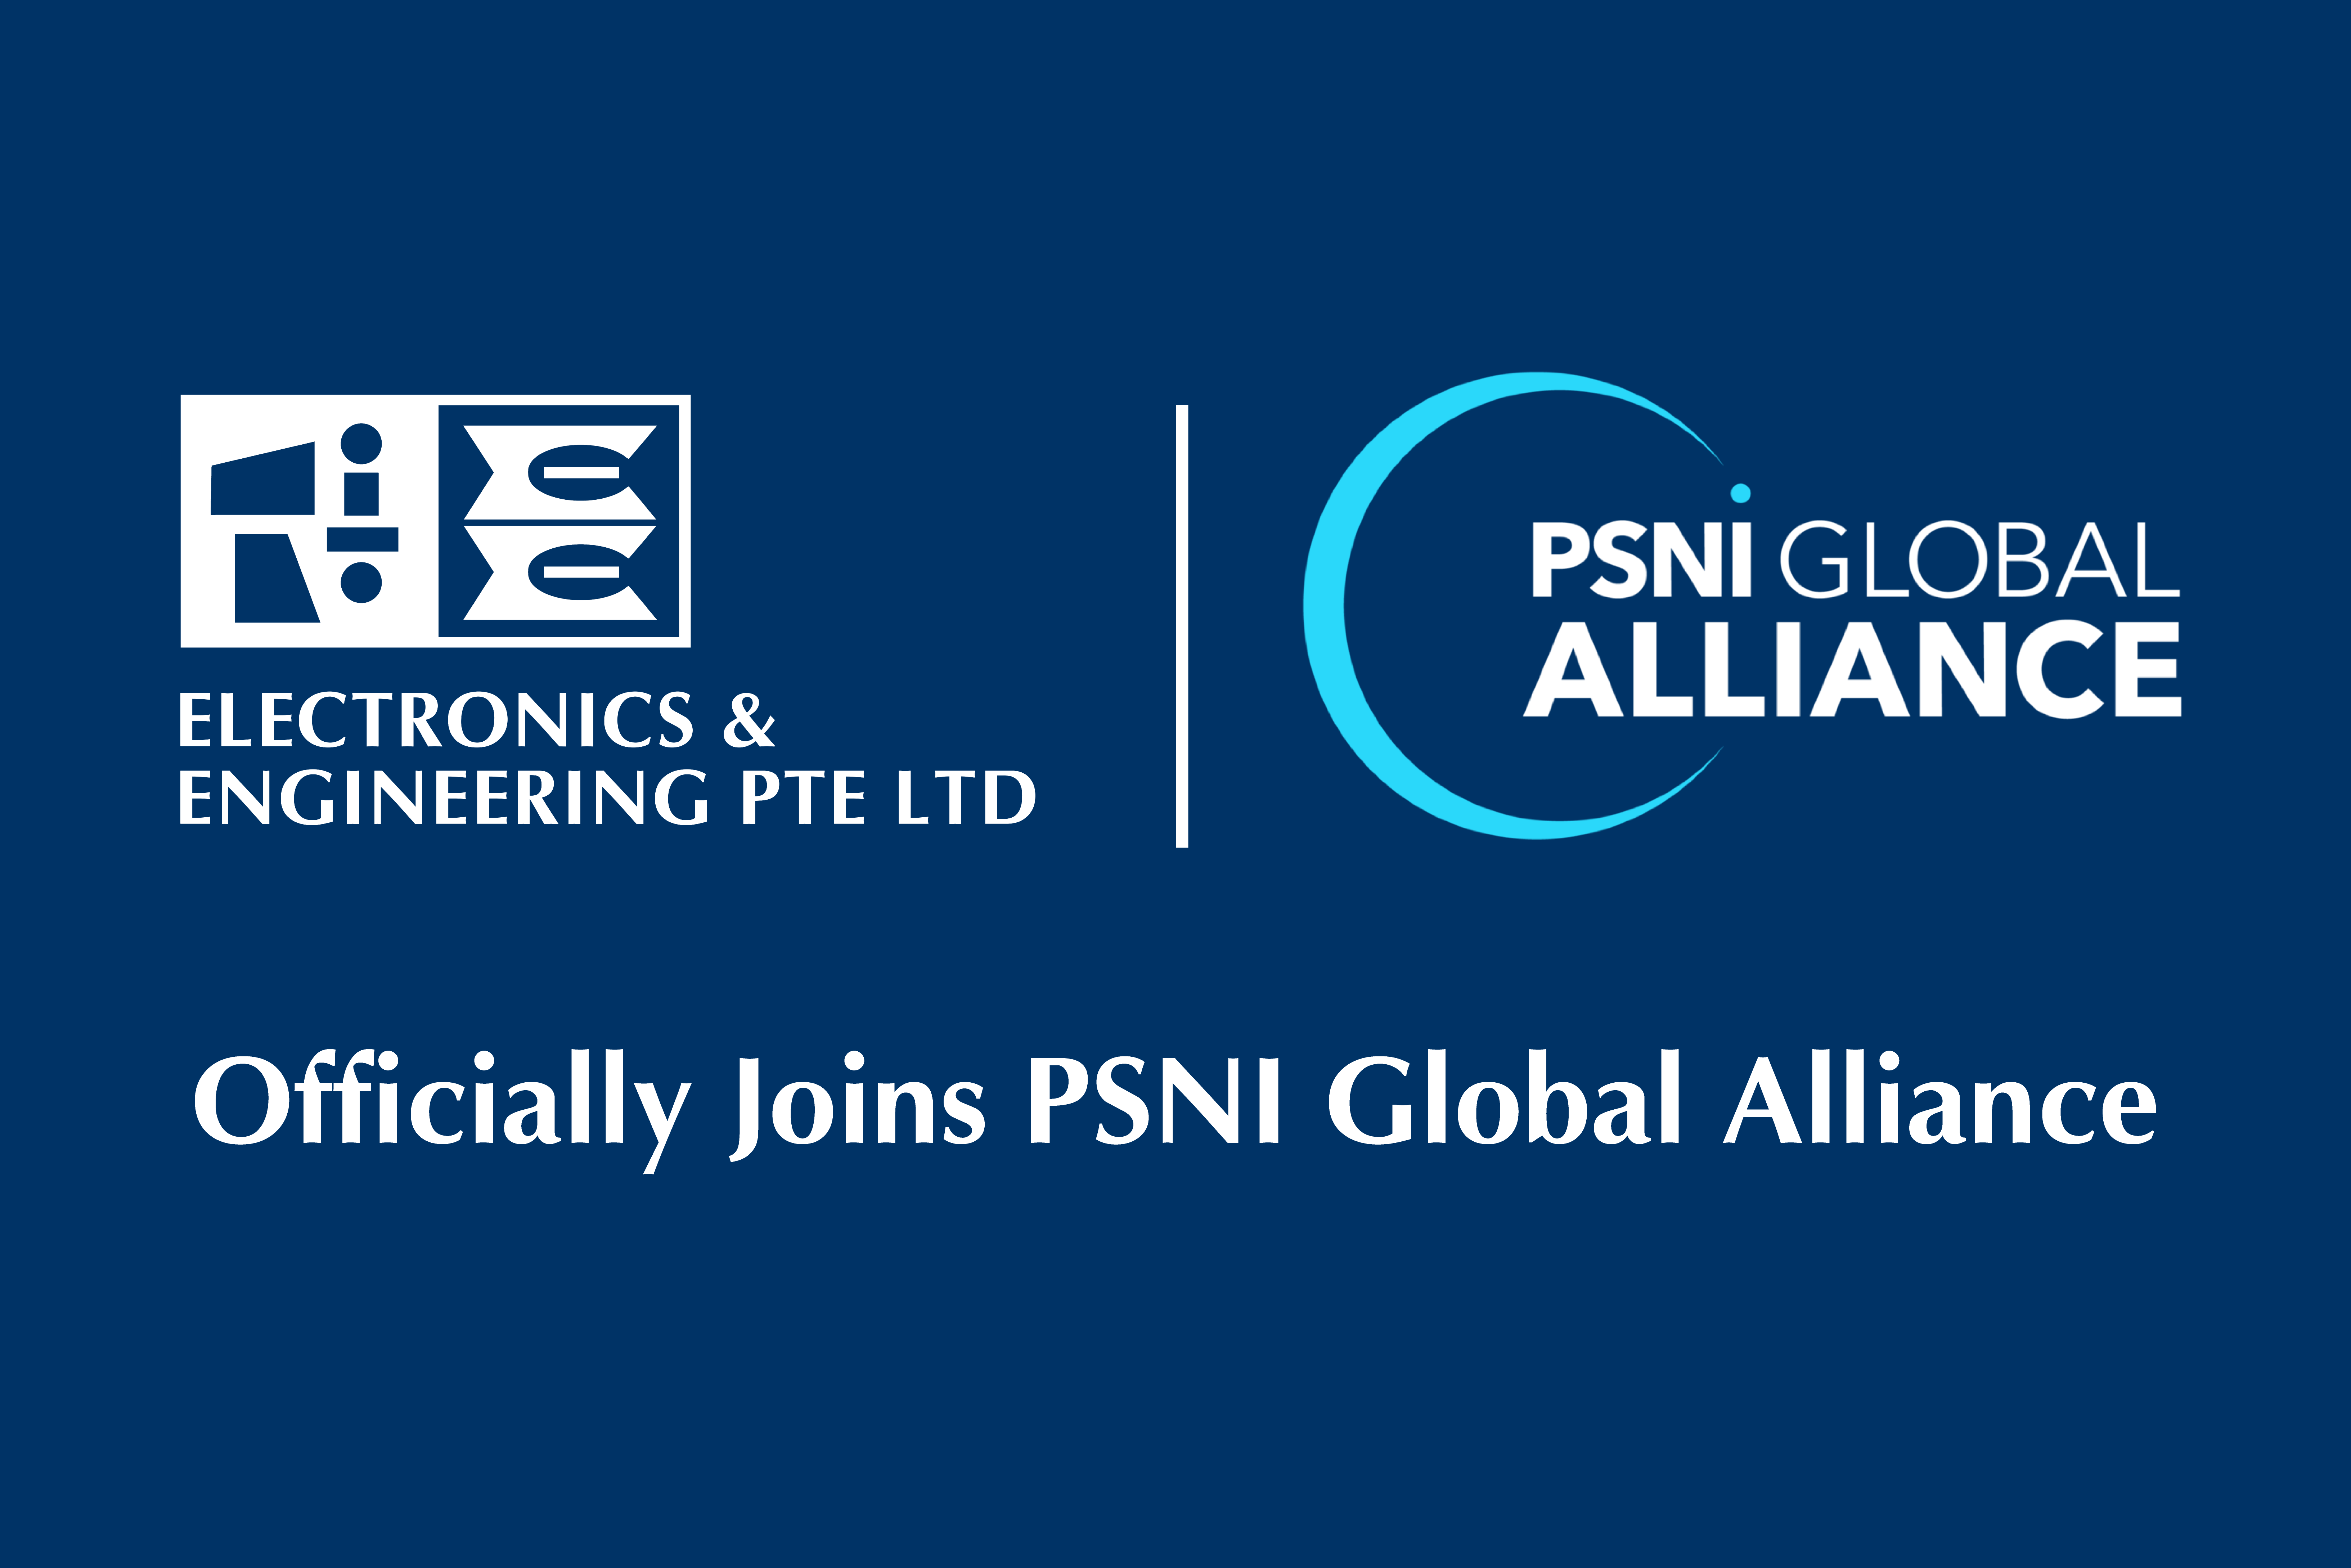 E&E Officially Joins PSNI Global Alliance As A New Certified Solution Provider